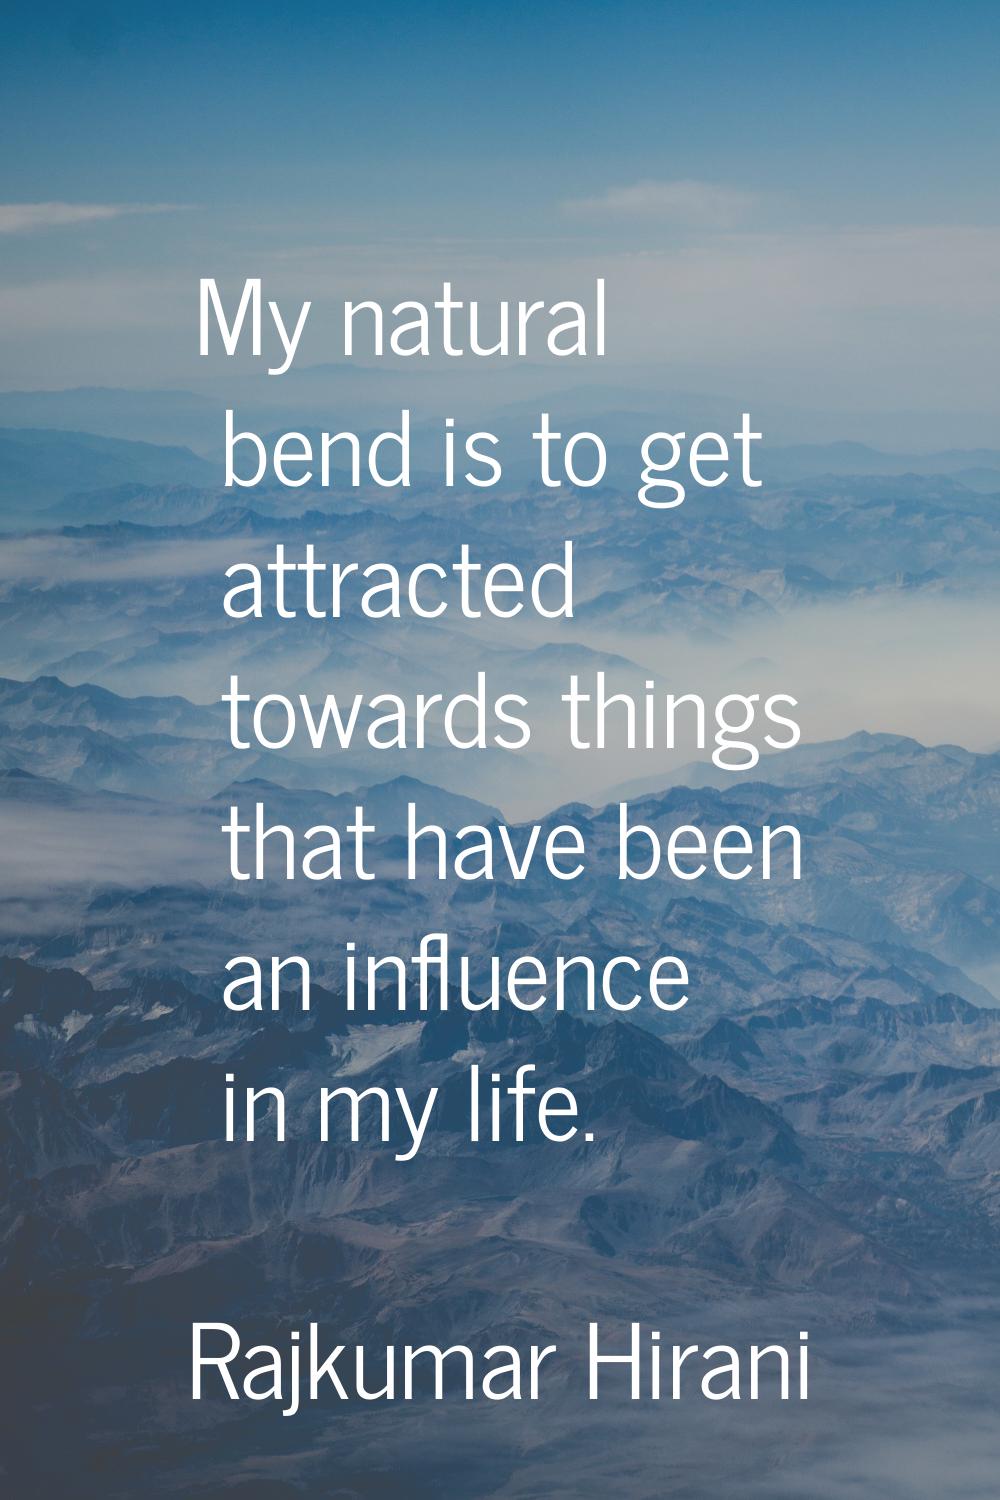 My natural bend is to get attracted towards things that have been an influence in my life.